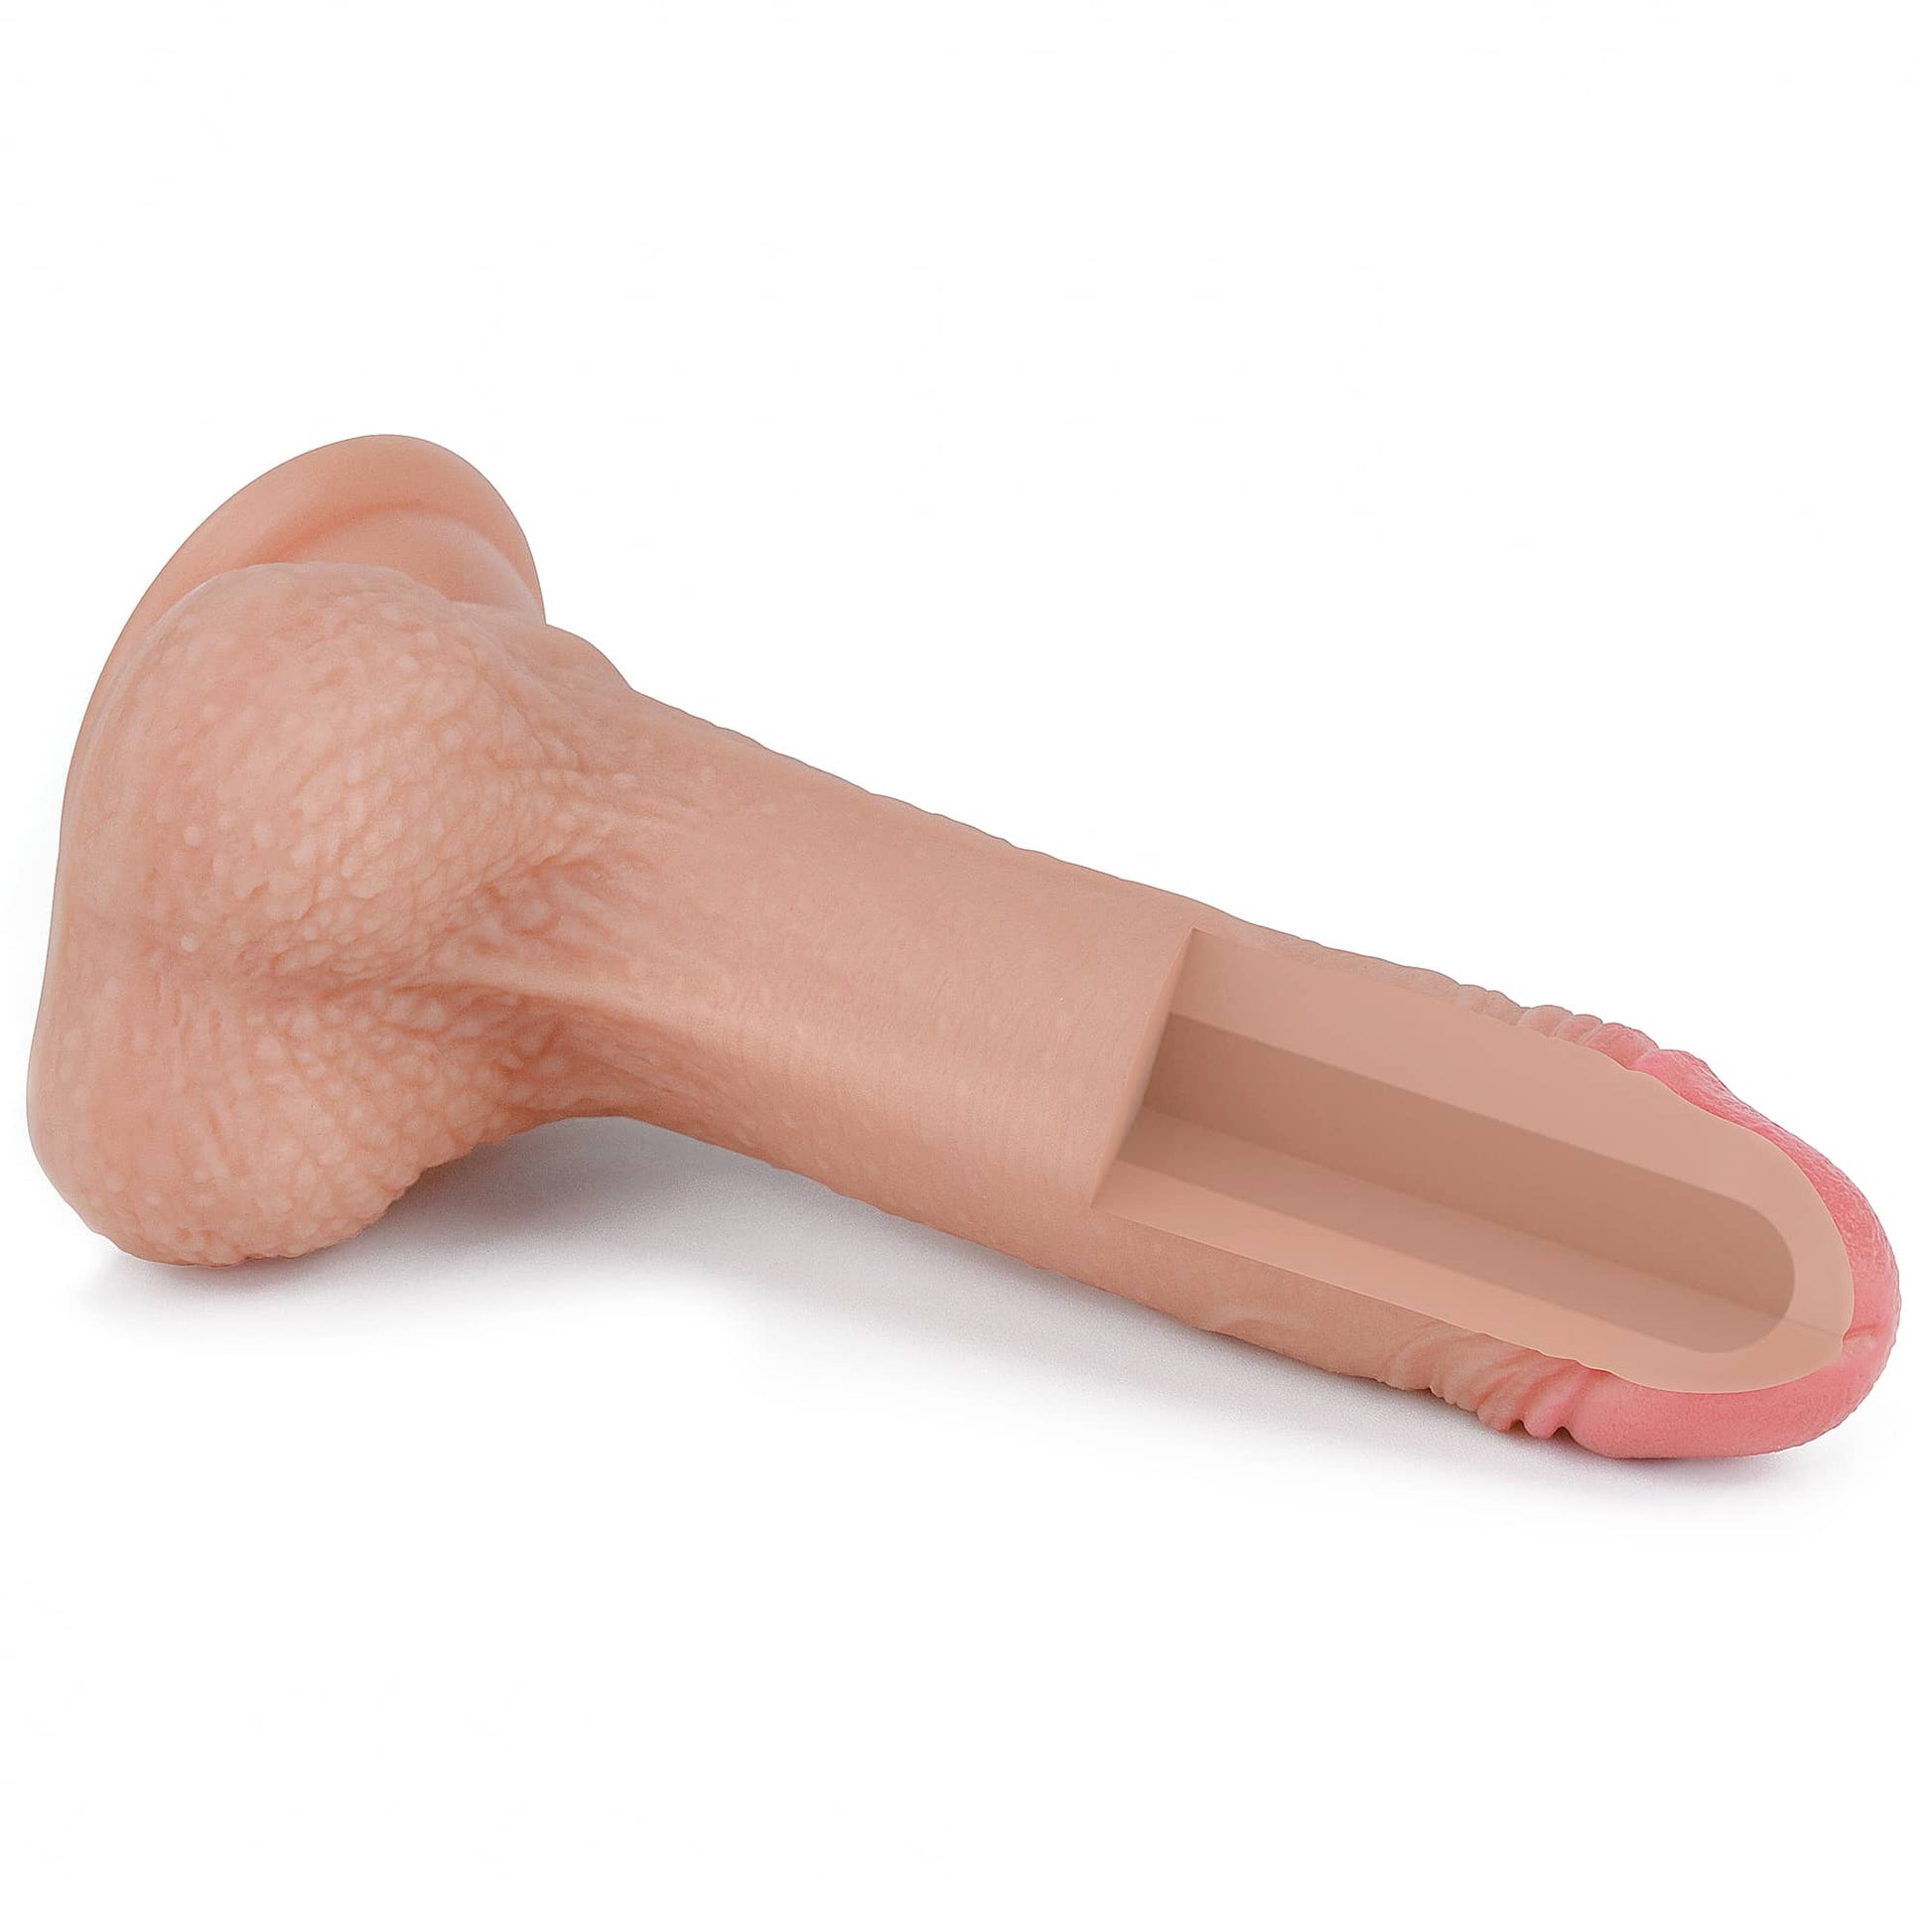 The 7 inches dual layered silicone flesh dildo has firm silicone inside and ultra soft silicone outside